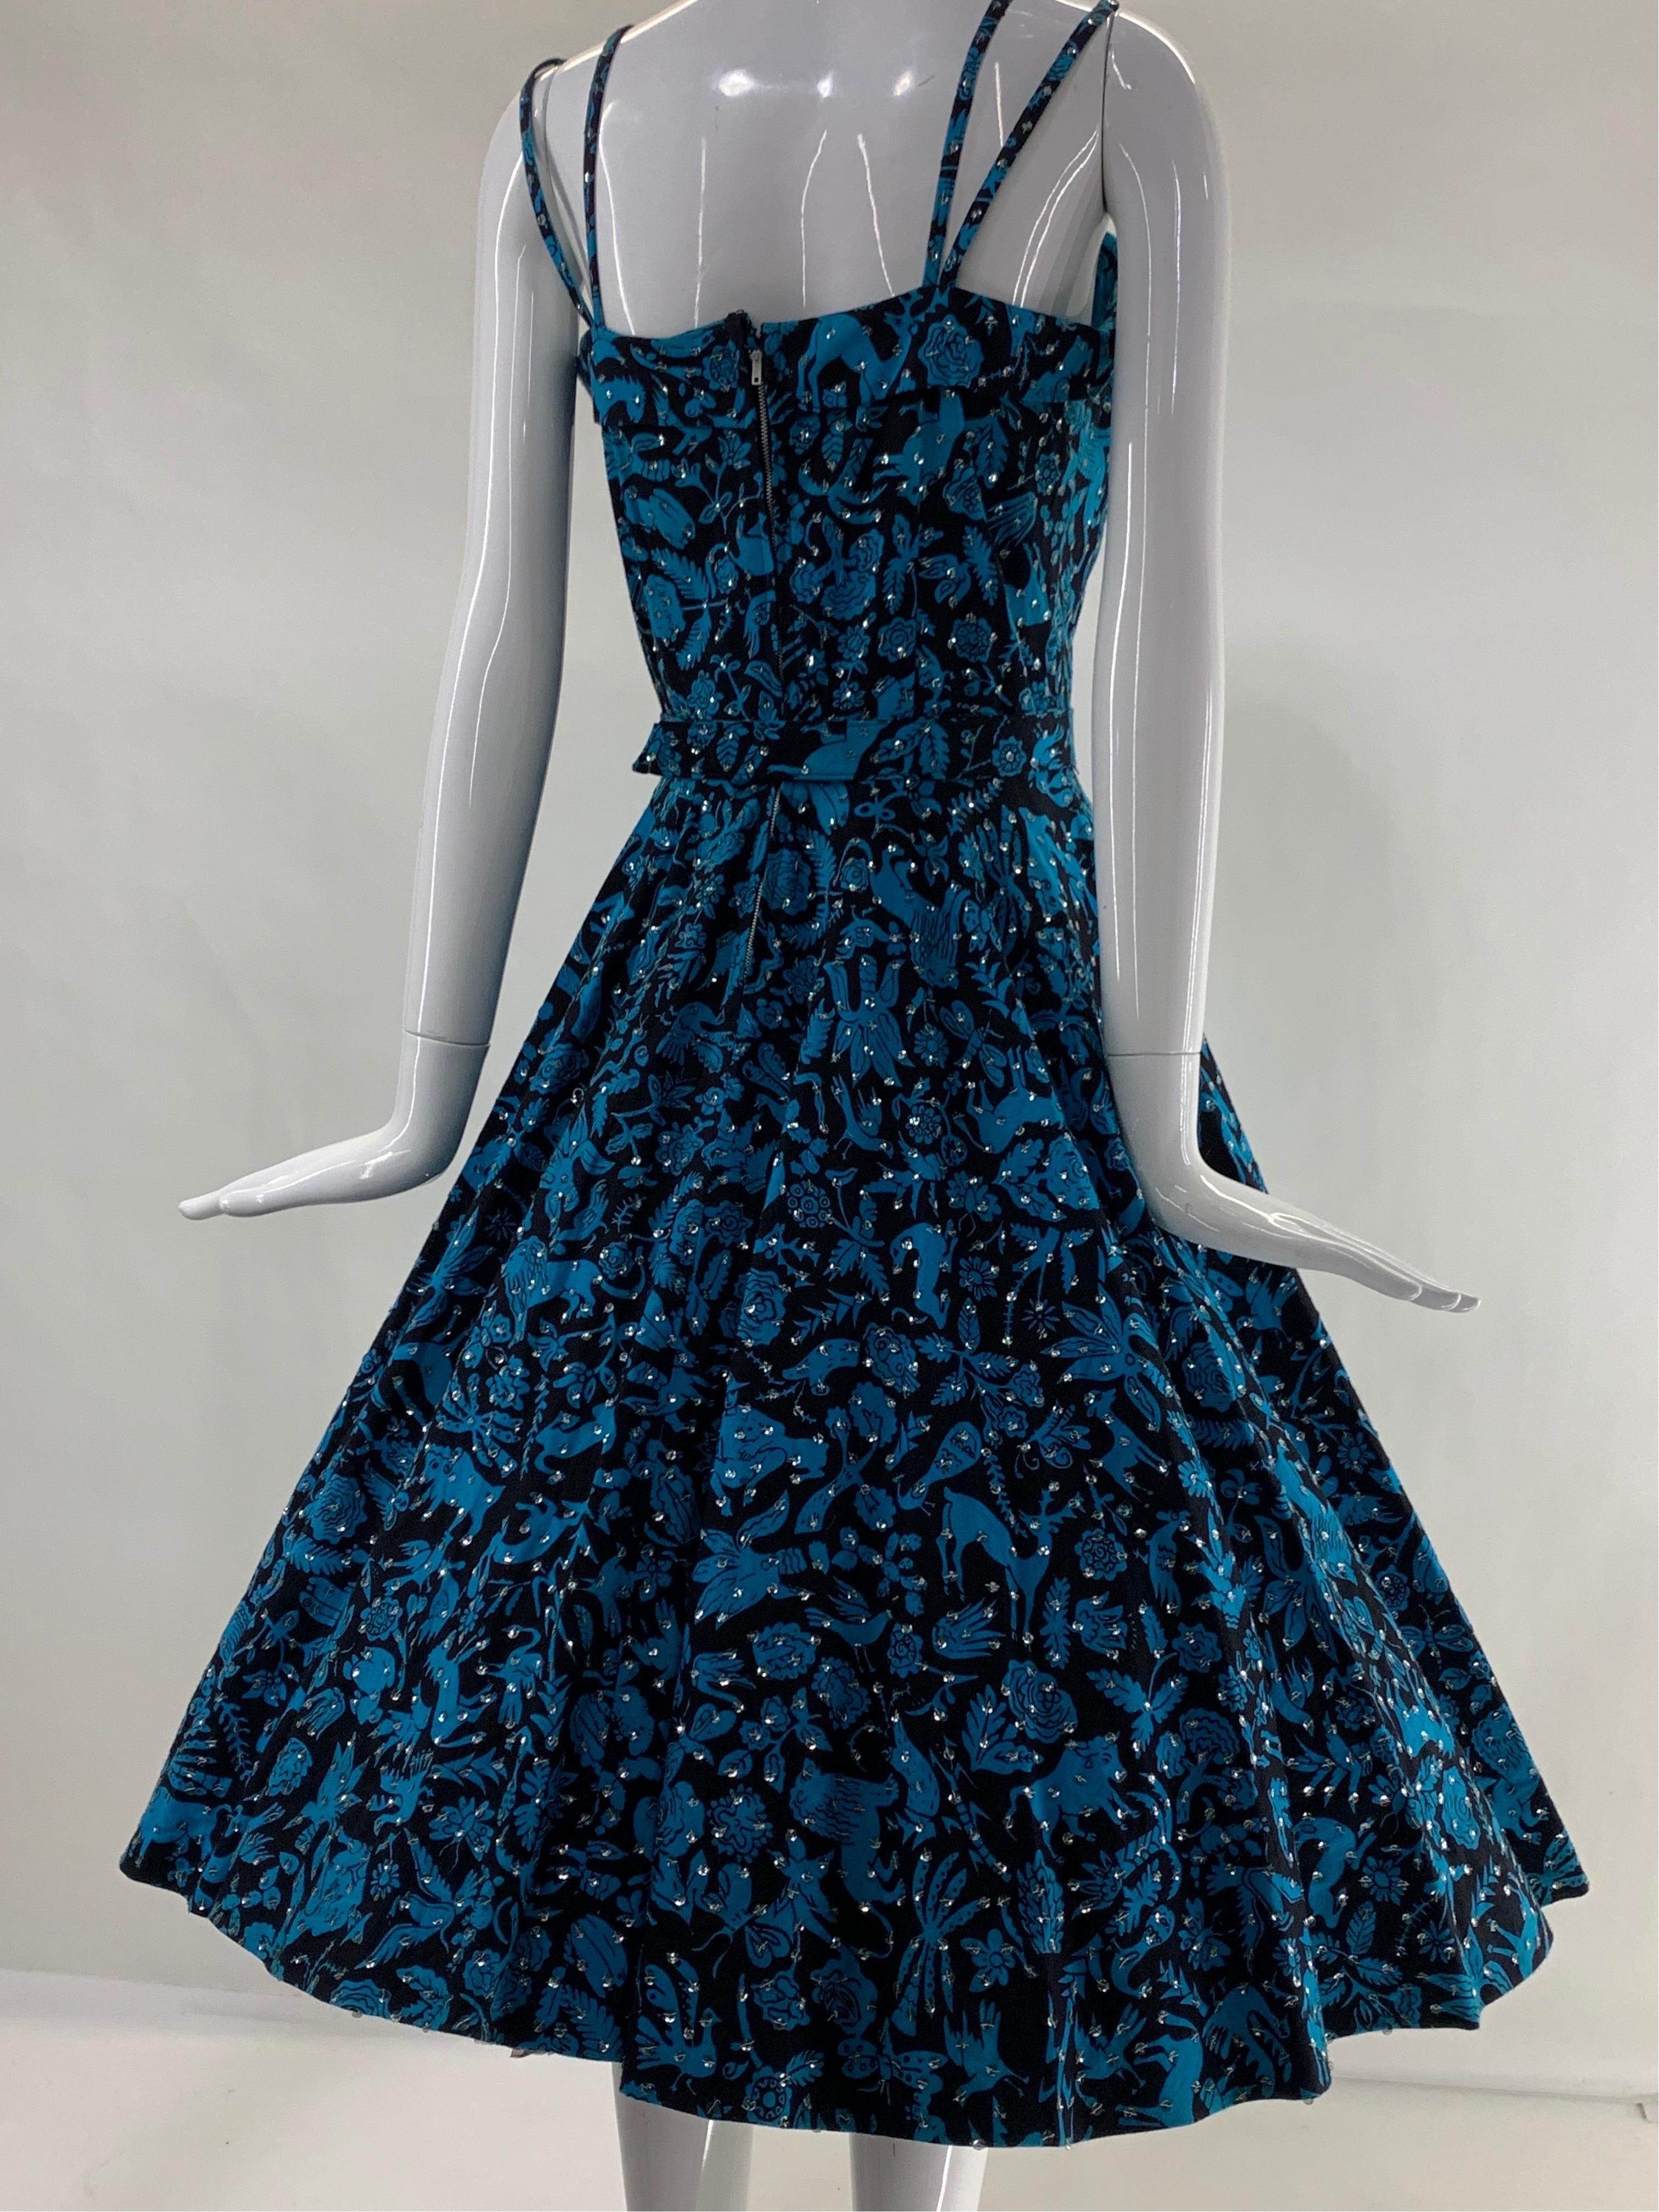 1950s Turquoise & Black Folkloric Print Cotton Summer Dress w/ Scattered Sequins For Sale 6